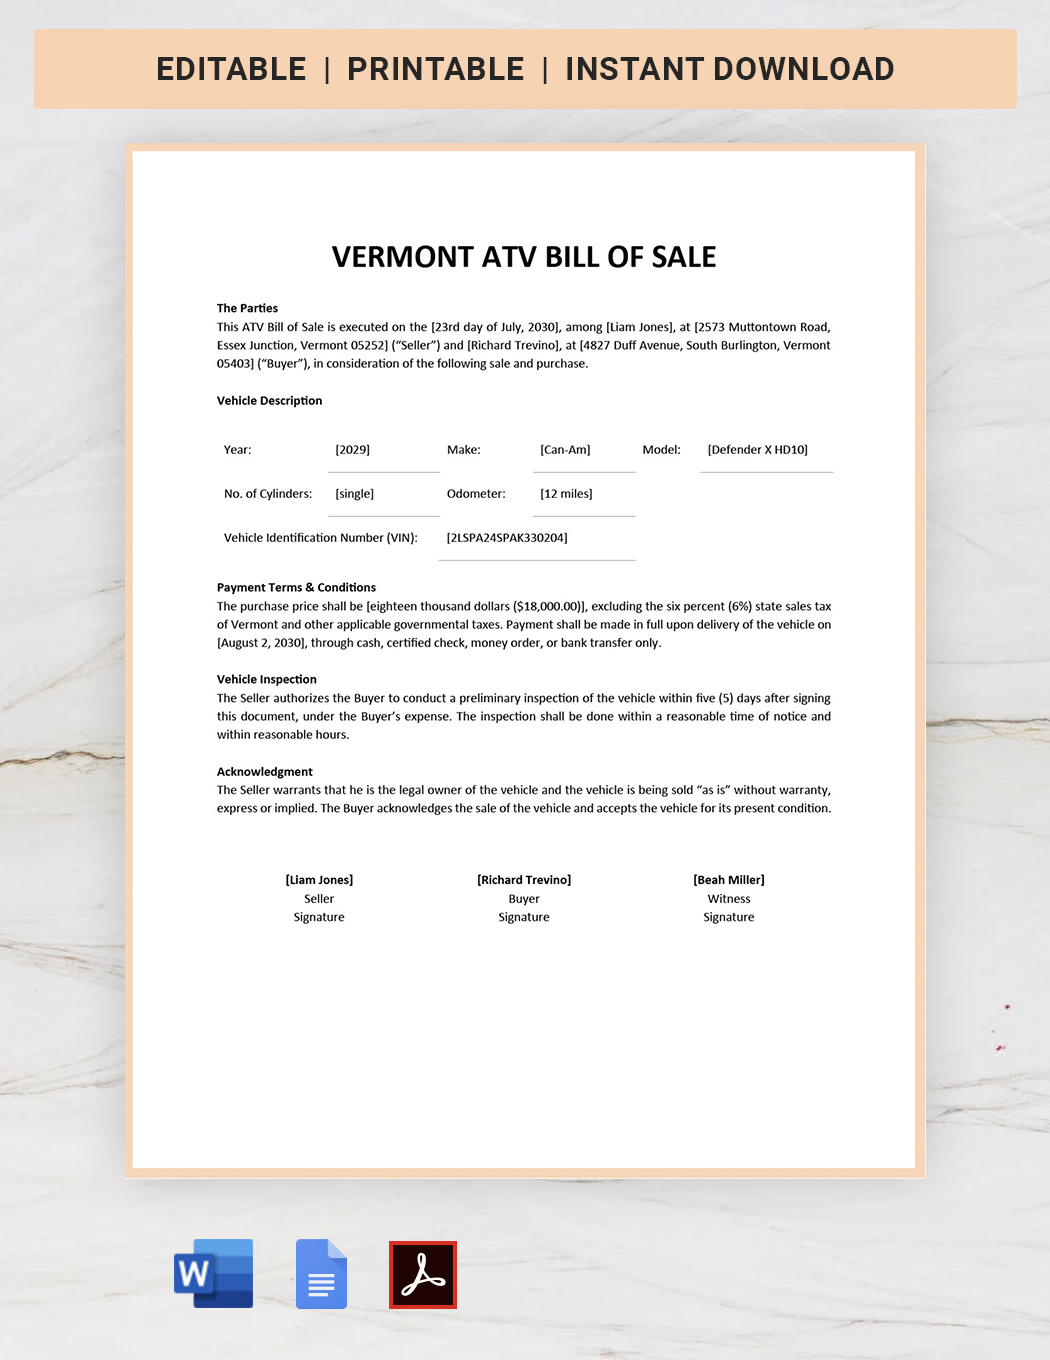 Vermont ATV Bill of Sale Template Front